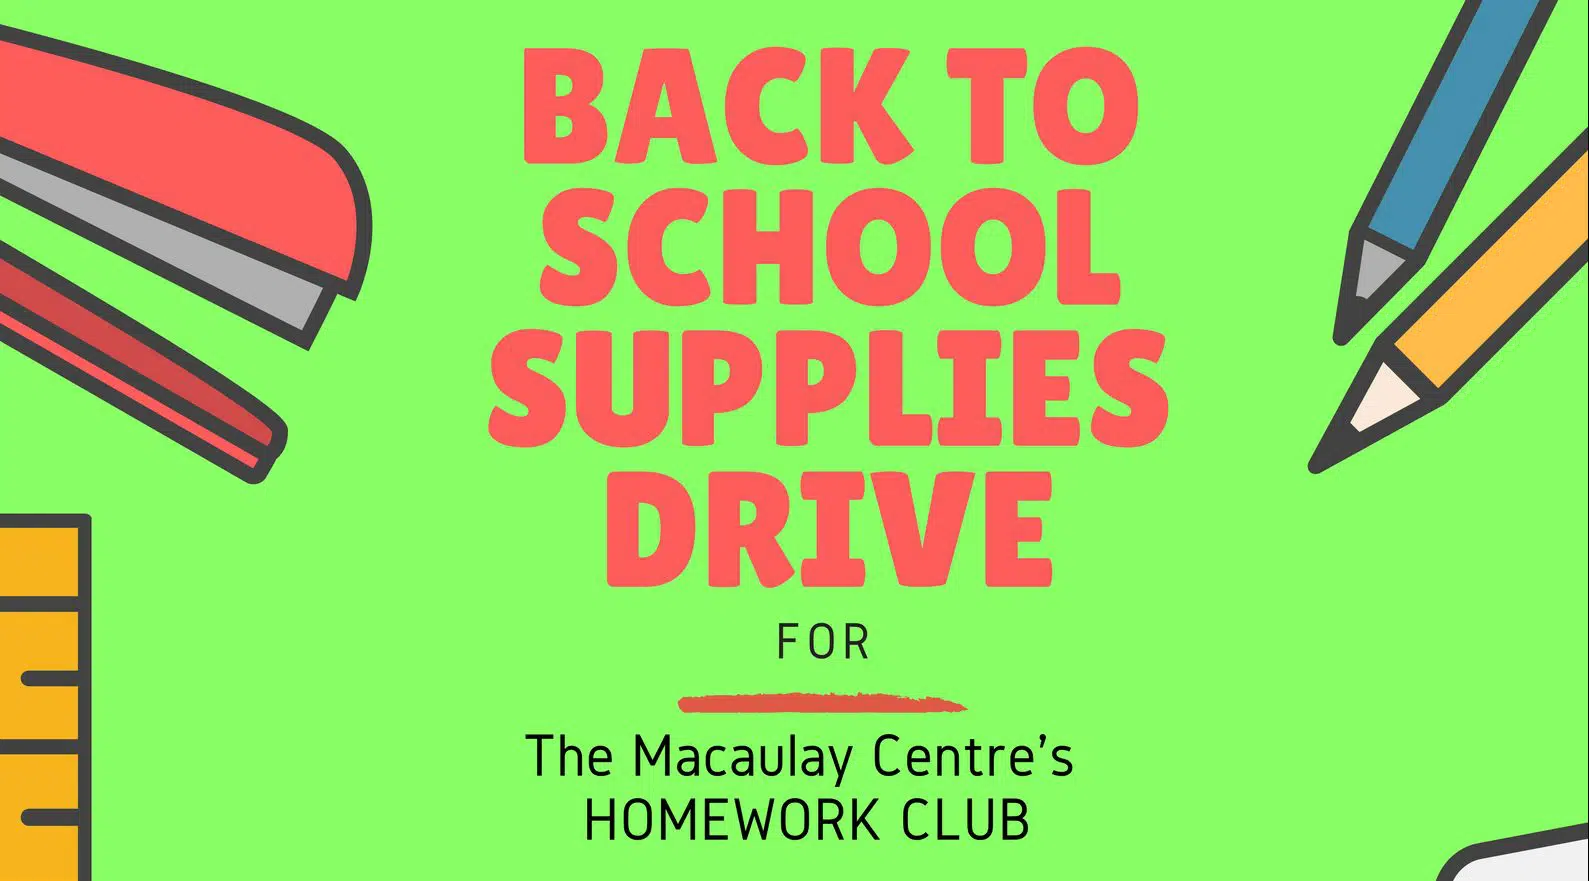 Back to School Drive!